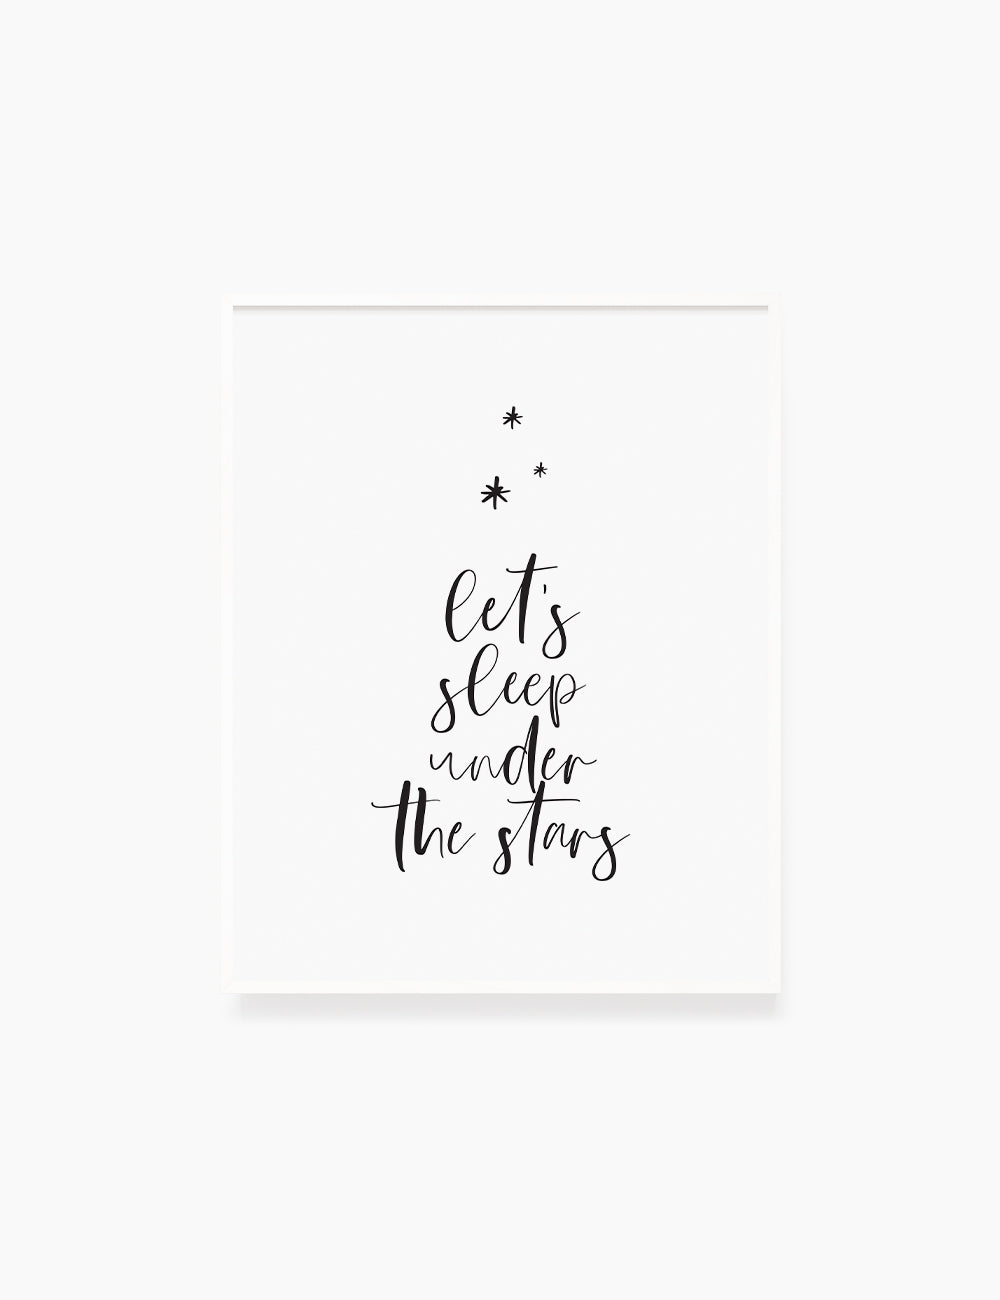 Printable Wall Art Quote: LET'S SLEEP UNDER THE STARS. Printable Poster. Stars Quote. WA030 - Paper Moon Art & Design